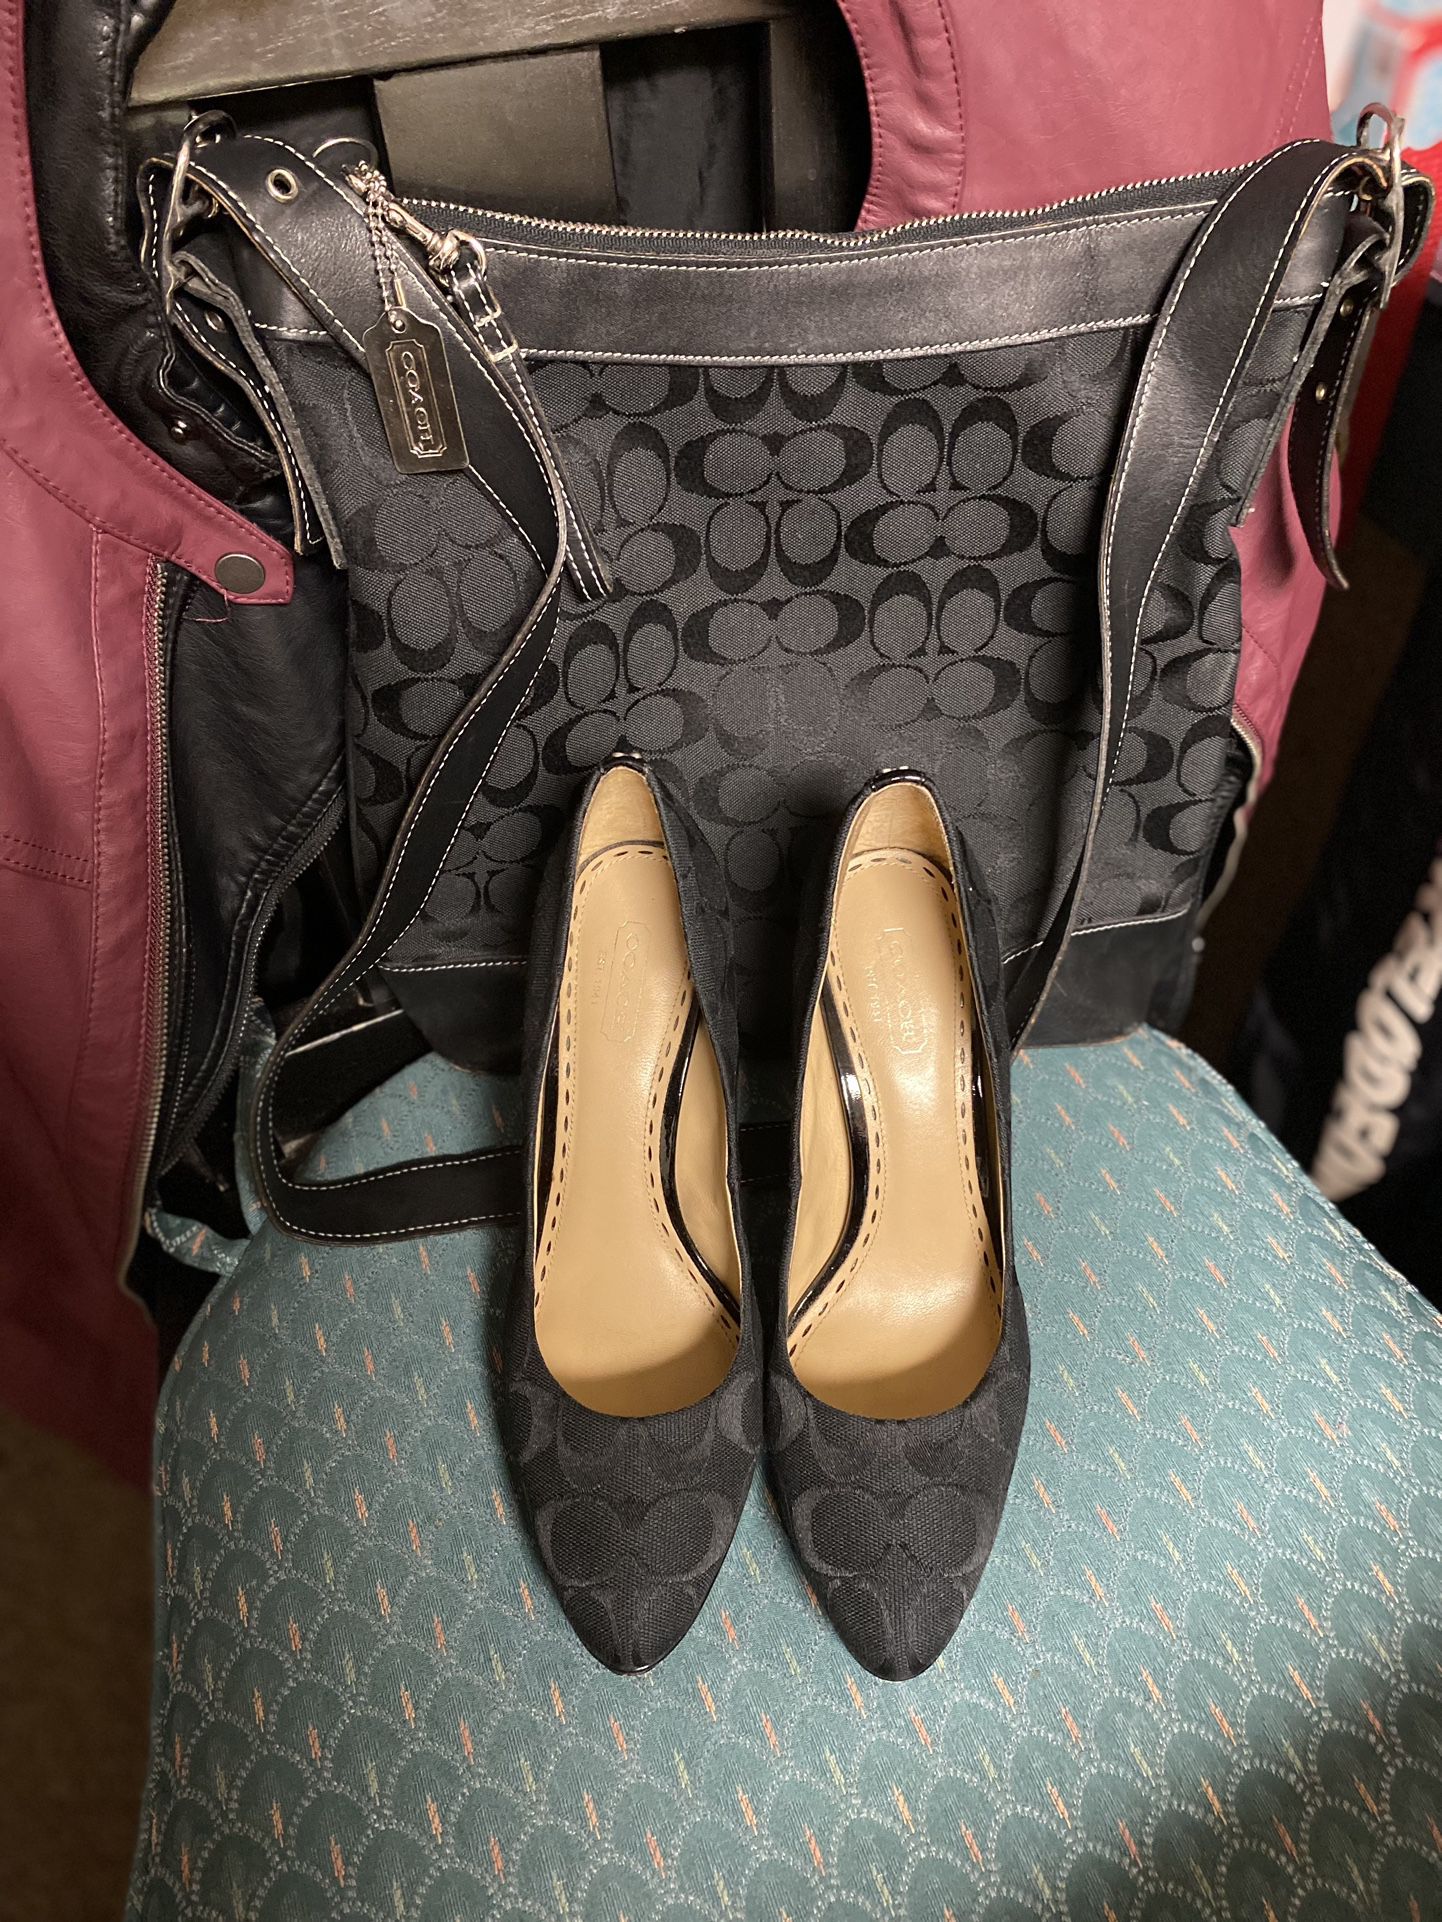 Coach Shoes And Purse